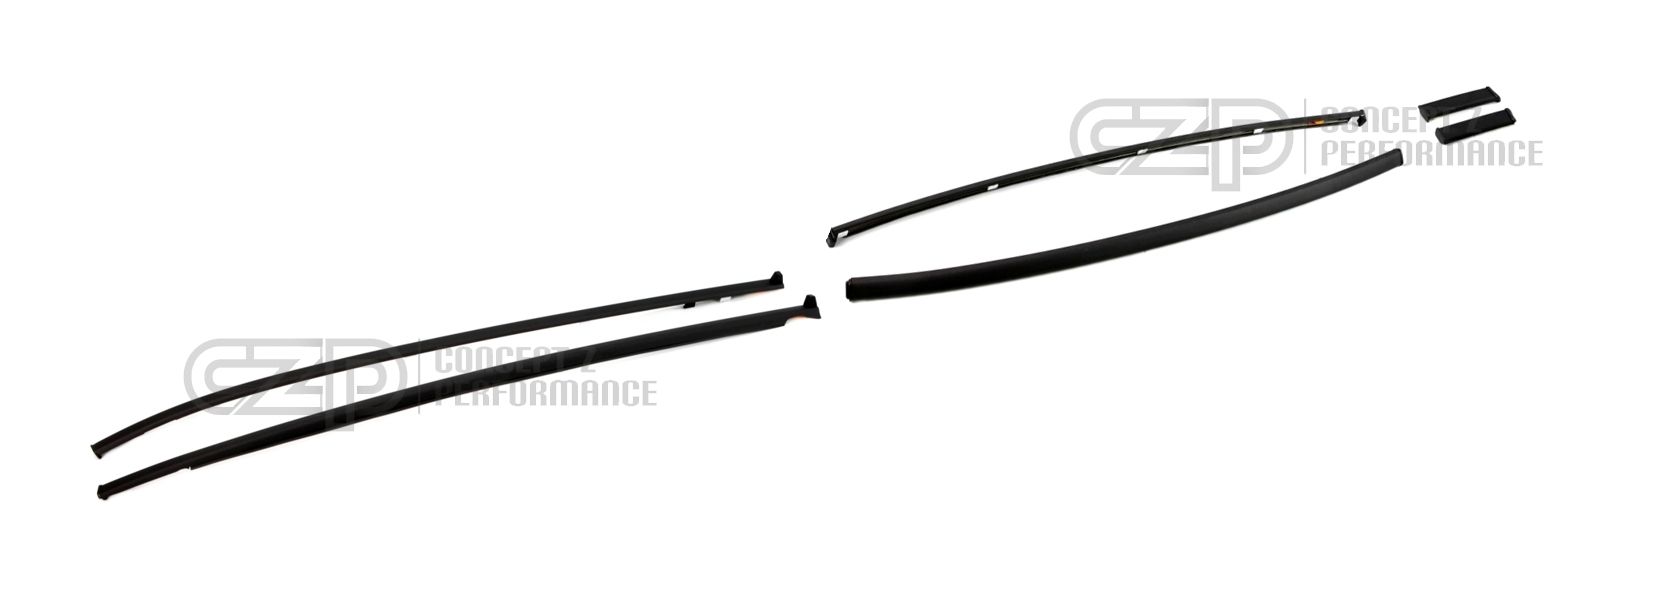 Nissan OEM 6-Piece Top Molding Kit, 2-Seater Coupe - Nissan 300ZX Z32